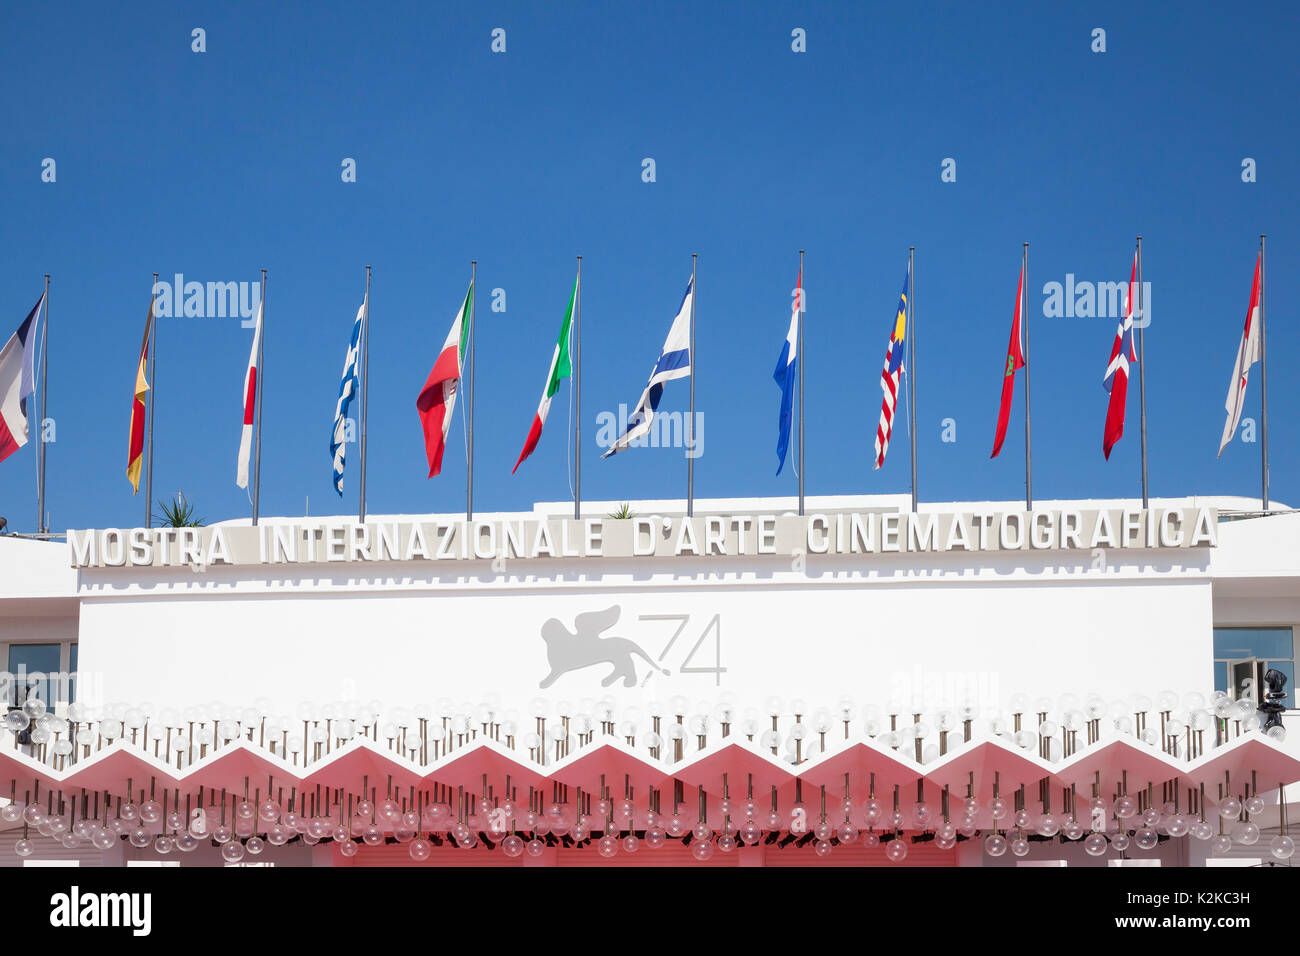 Lido, Venice, Italy. 30th Aug, 2017. Venues for the 2017 Film Festival after last minute preparations and installations and before the crowds arrive for the opening of the festival. The signage and country flags on the facade of the Mostra Internazionale d'Arte Cinematografica. Stock Photo